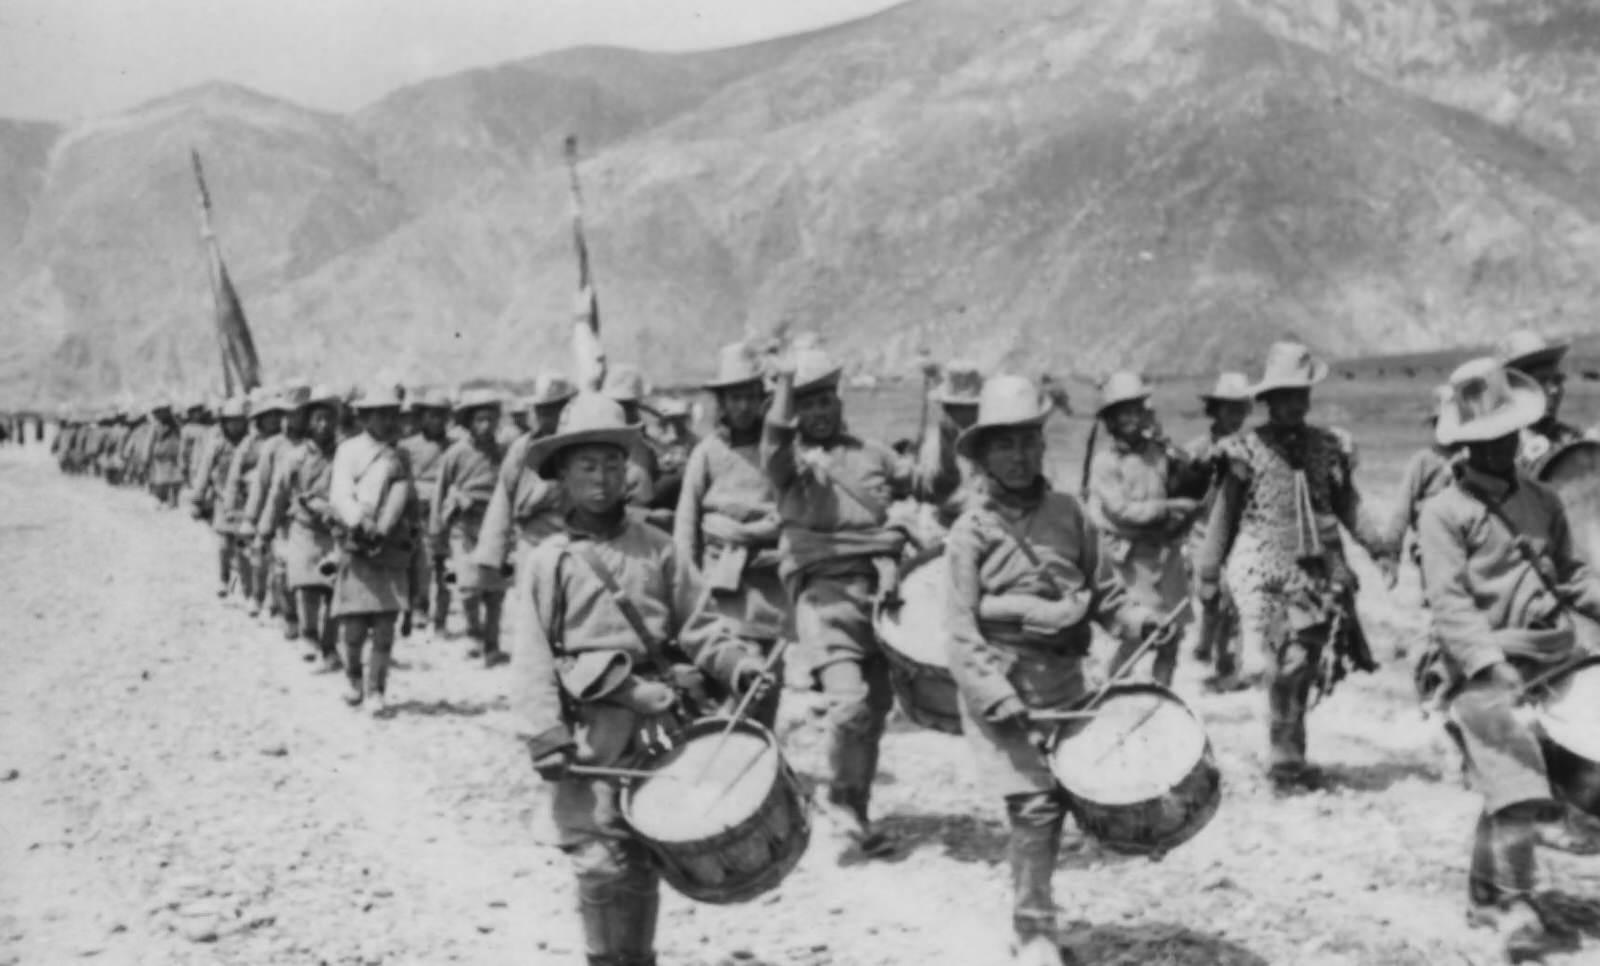 Part of the Small Tibetan Army on Parade, 1944